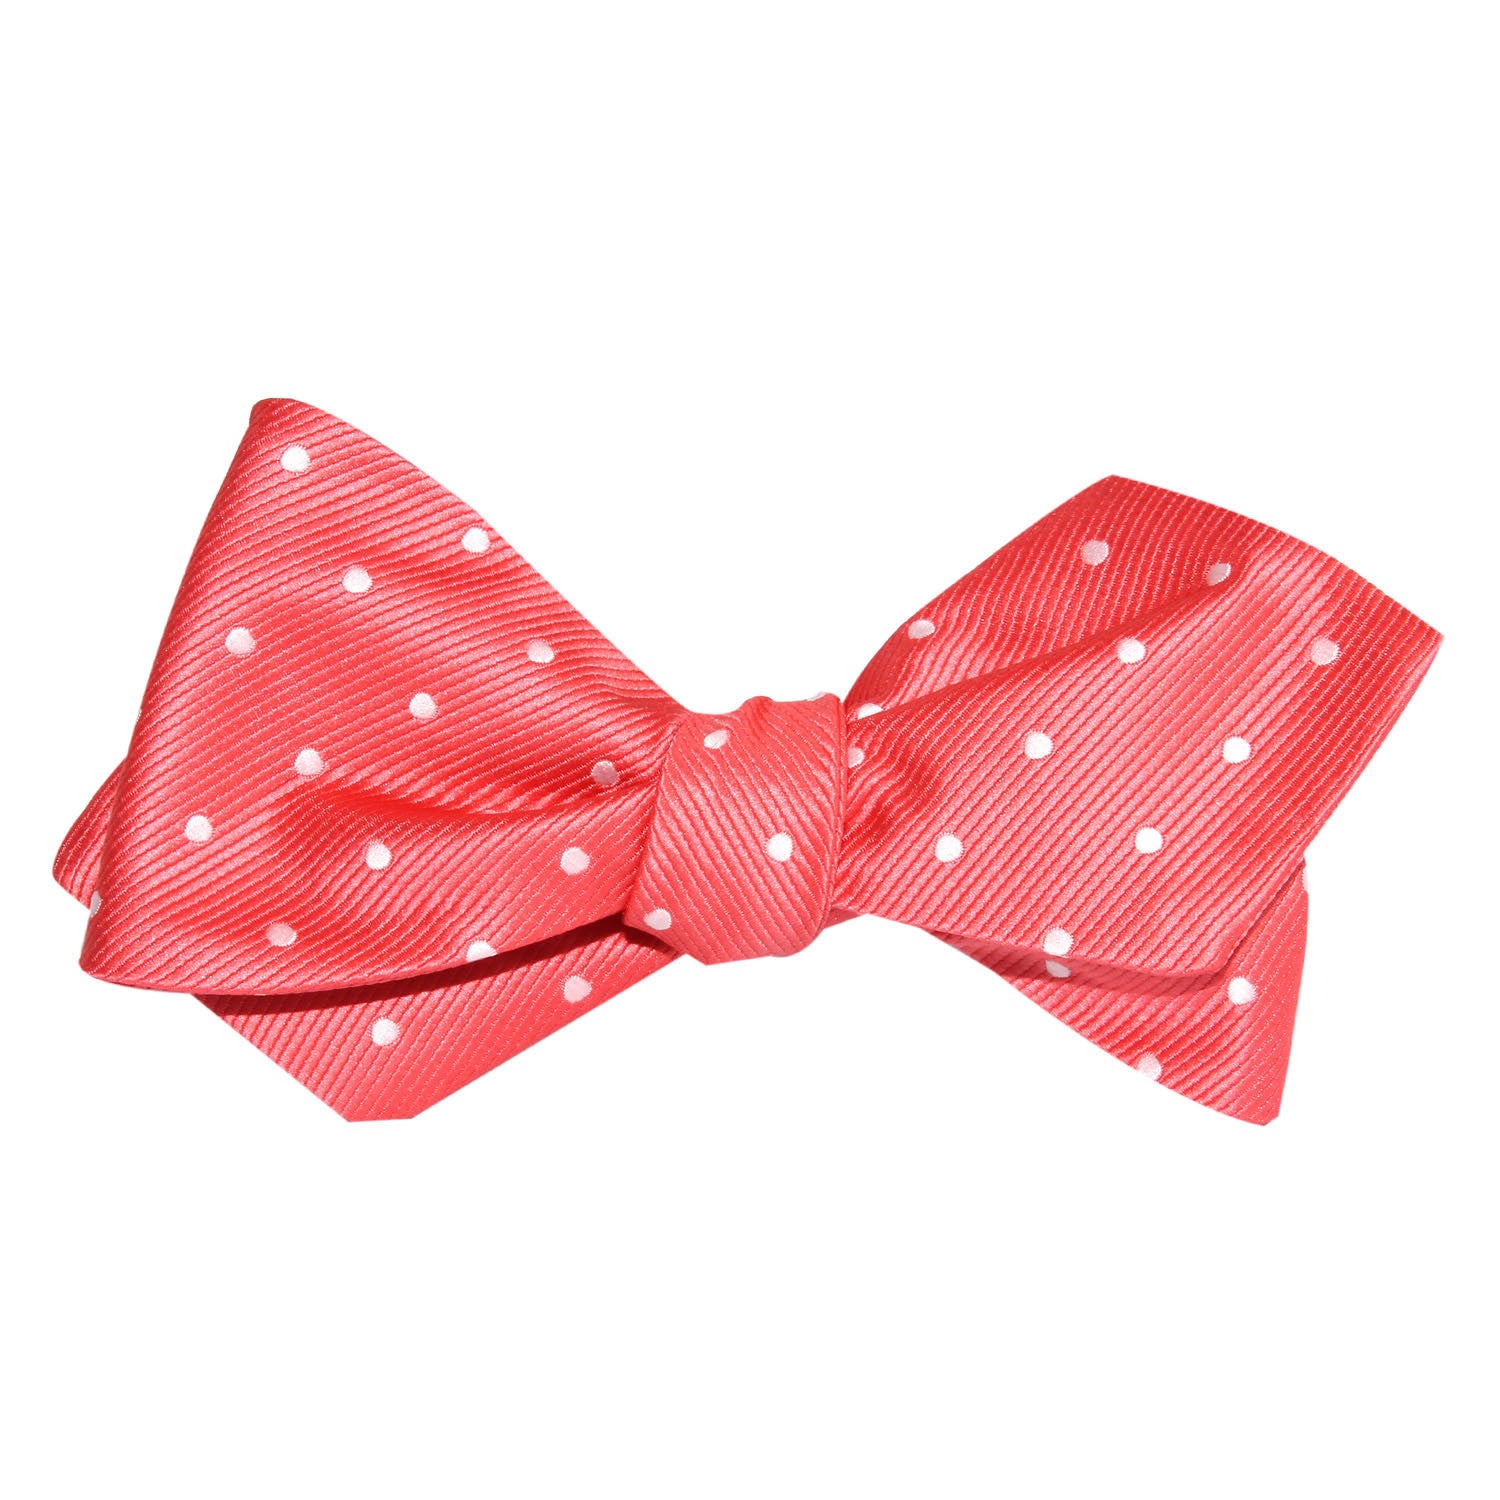 Coral Pink with White Polka Dots Self Tie Diamond Tip Bow Tie 2